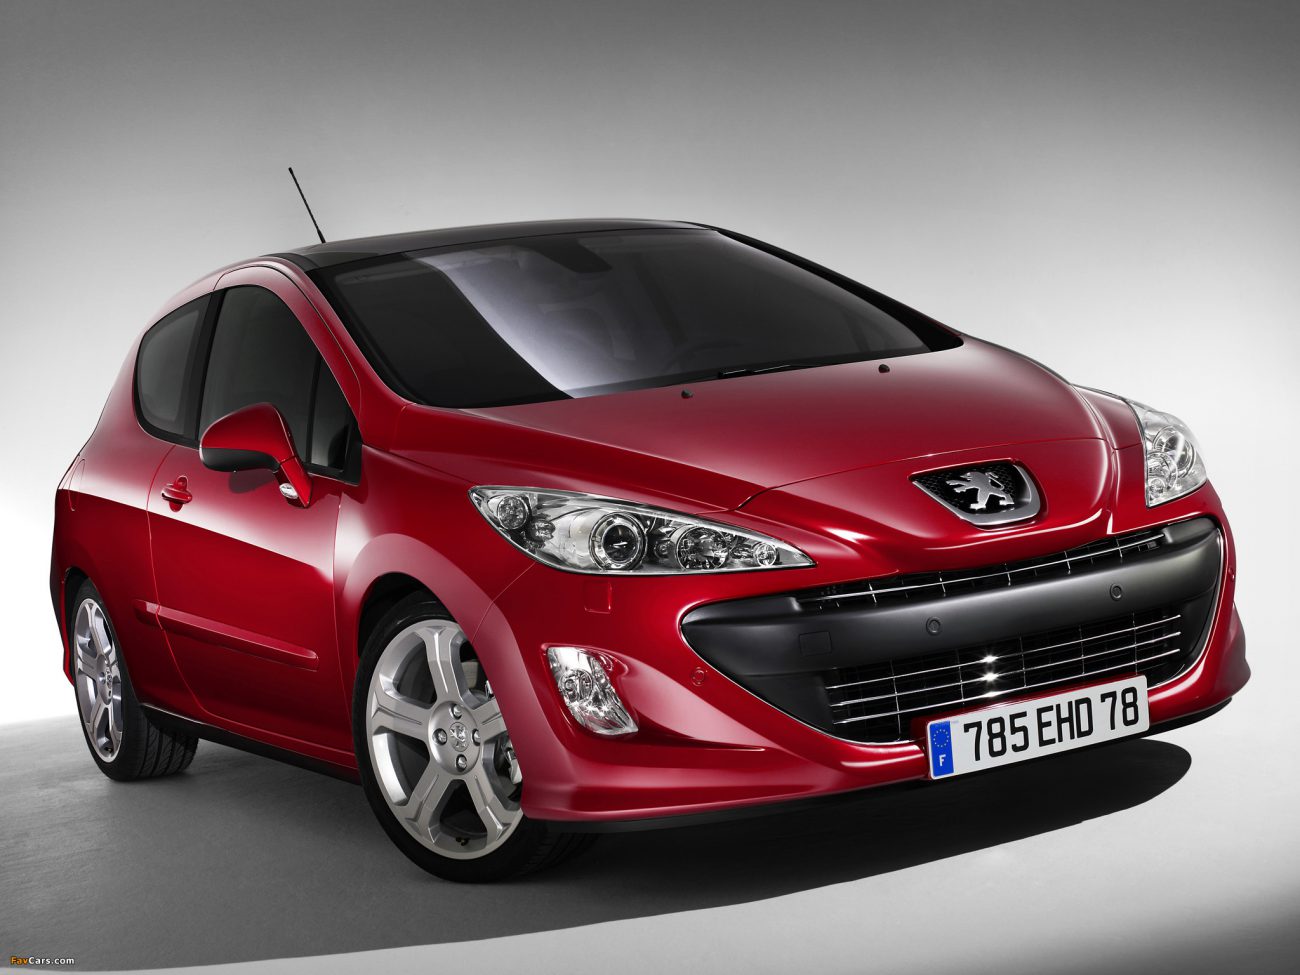 Seven years later, Peugeot will abandon the conventional engine